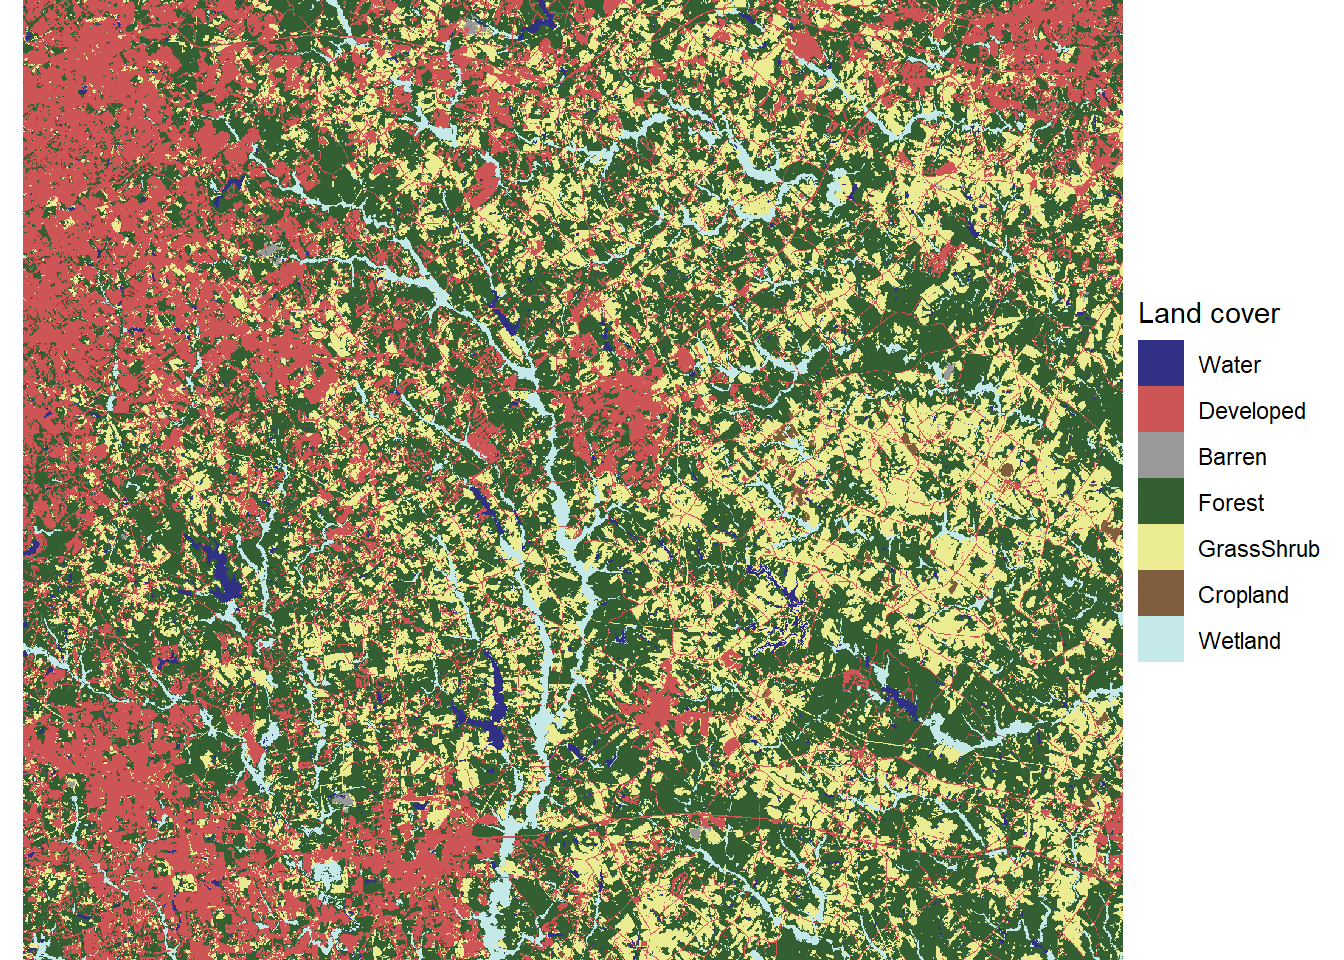 Land cover map with reclassified land cover types and desaturated colors.